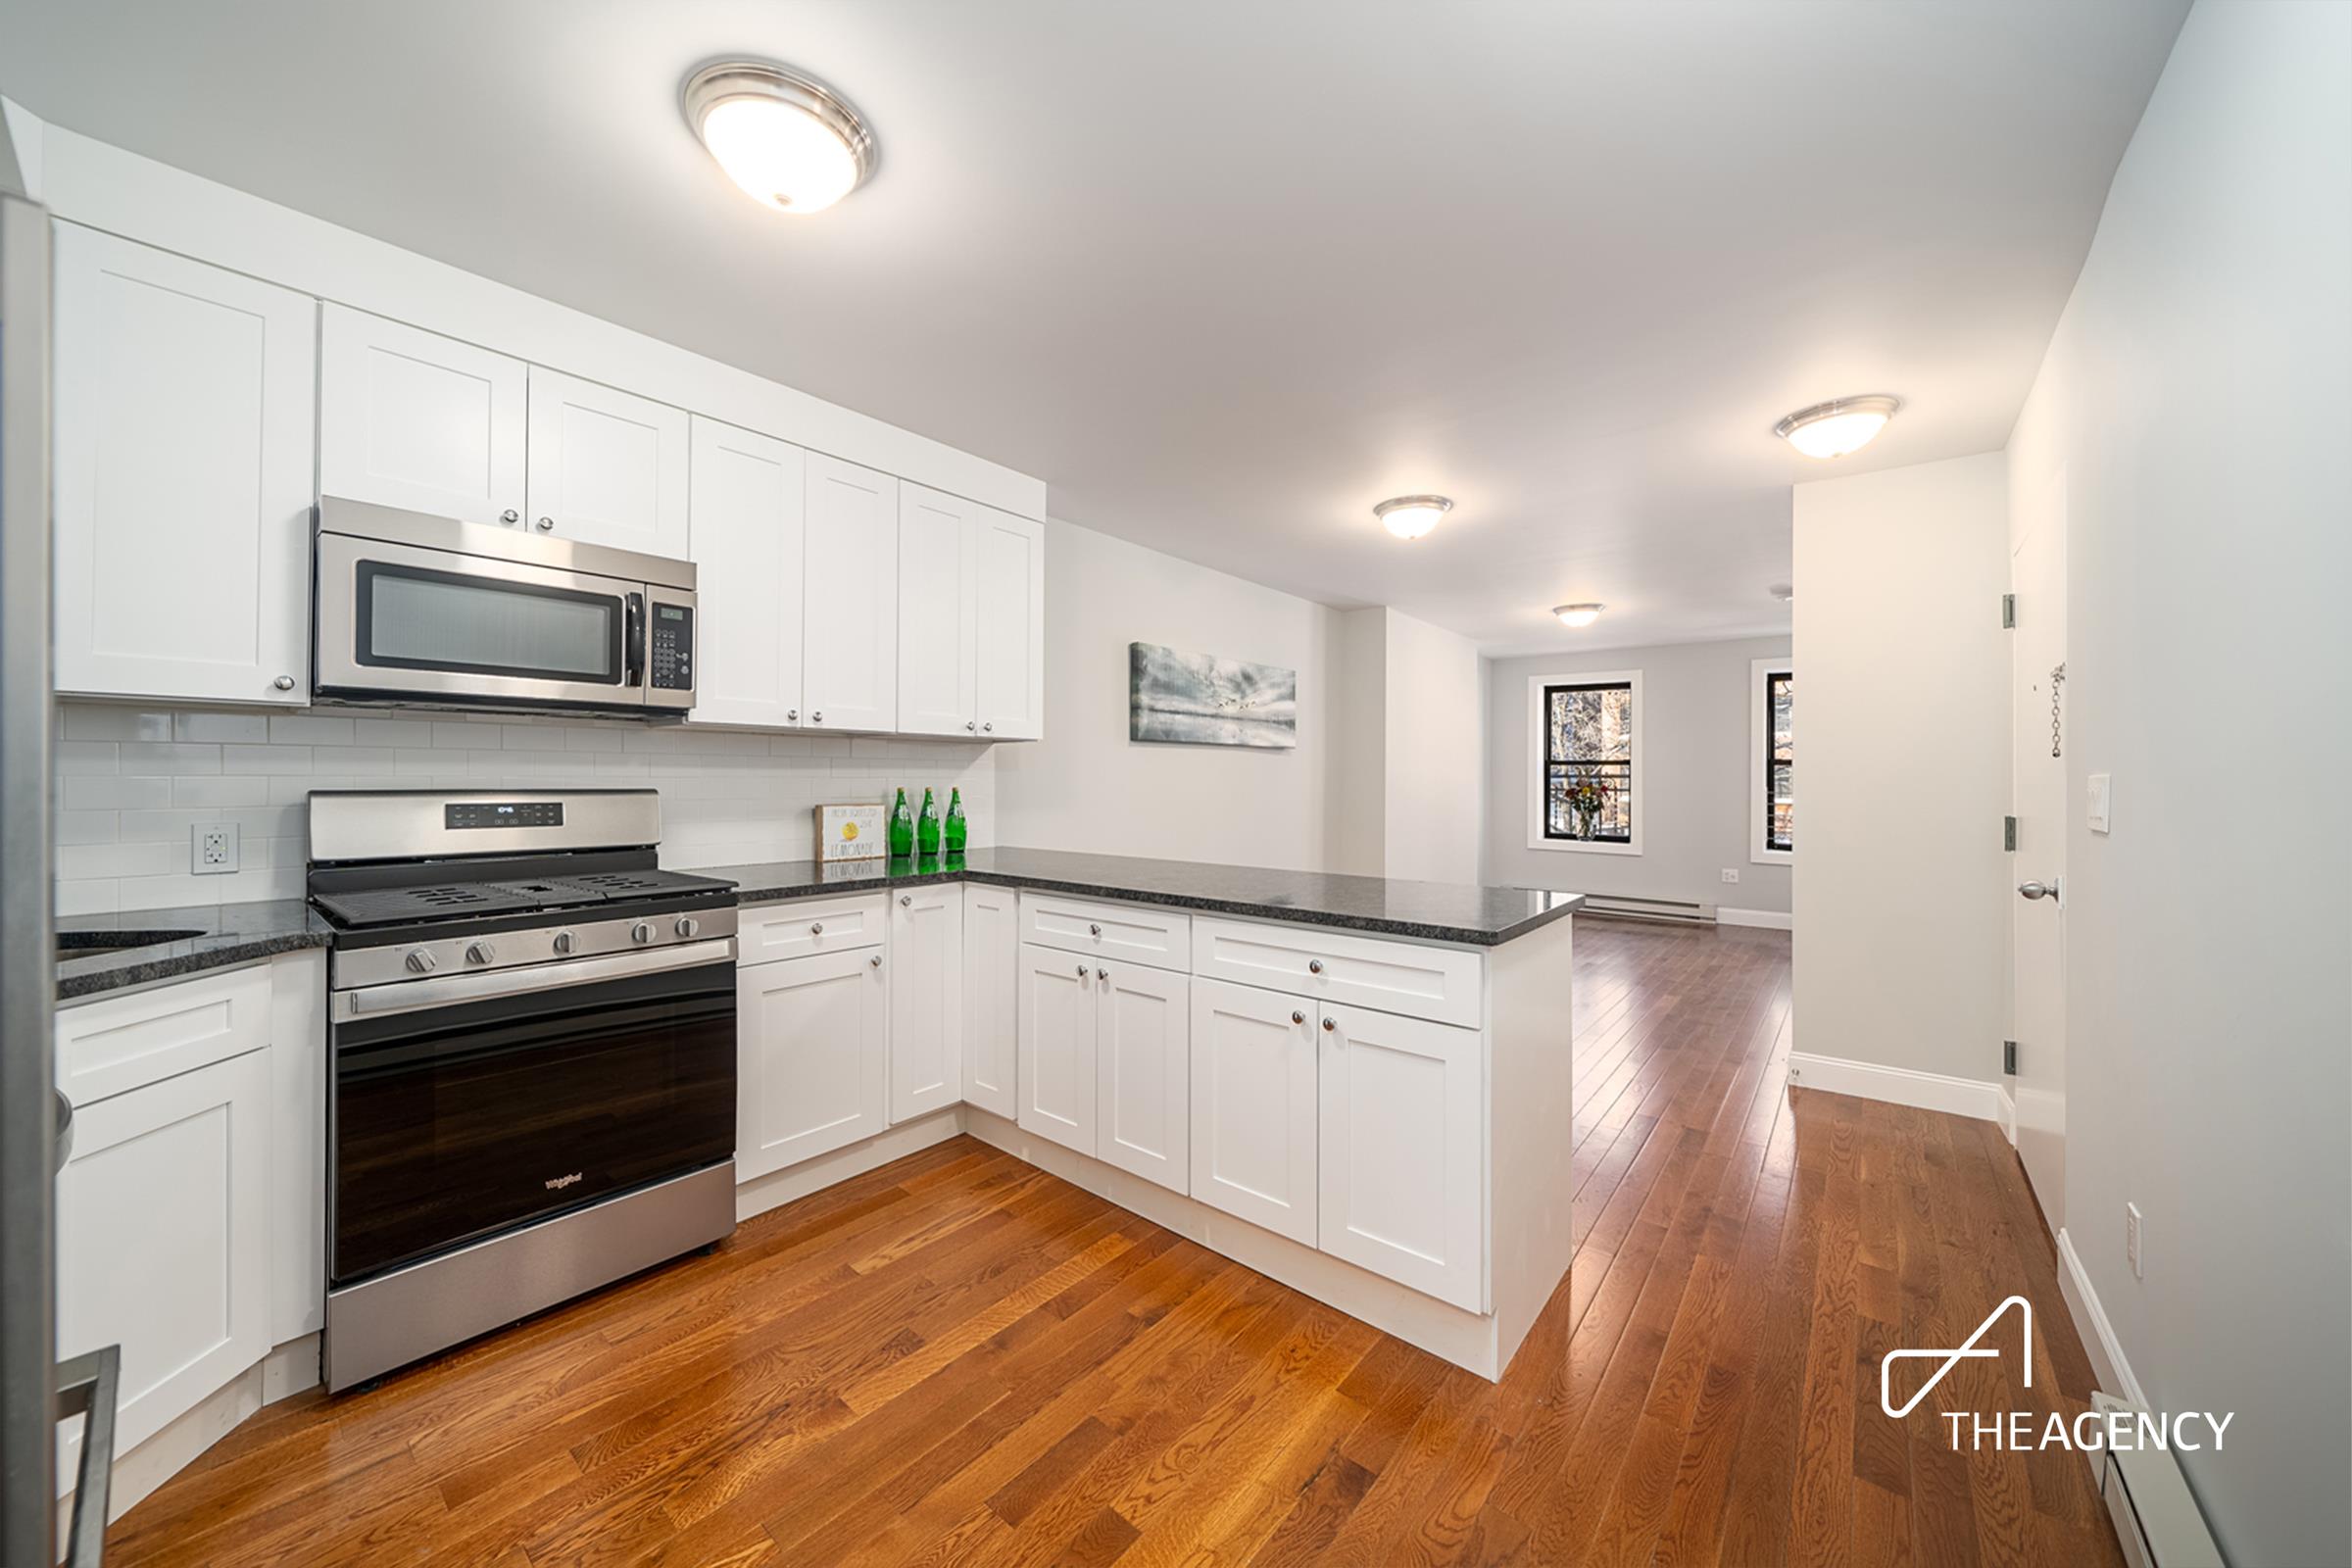 519 3rd Avenue 2, Murray Hill, Midtown East, NYC - 2 Bedrooms  
2 Bathrooms  
4 Rooms - 